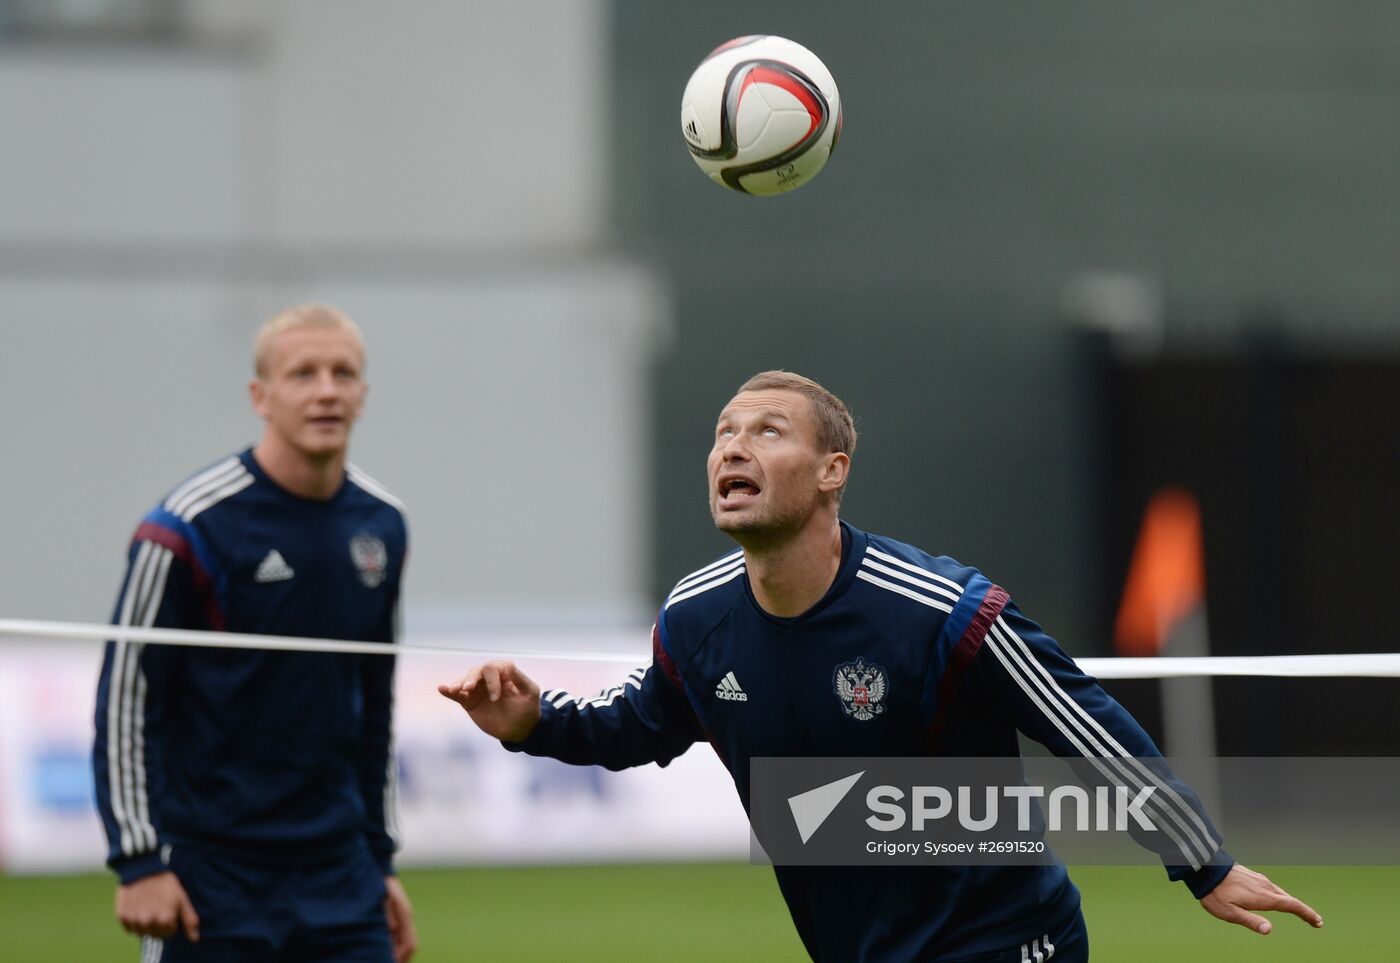 Russian national football team's training session